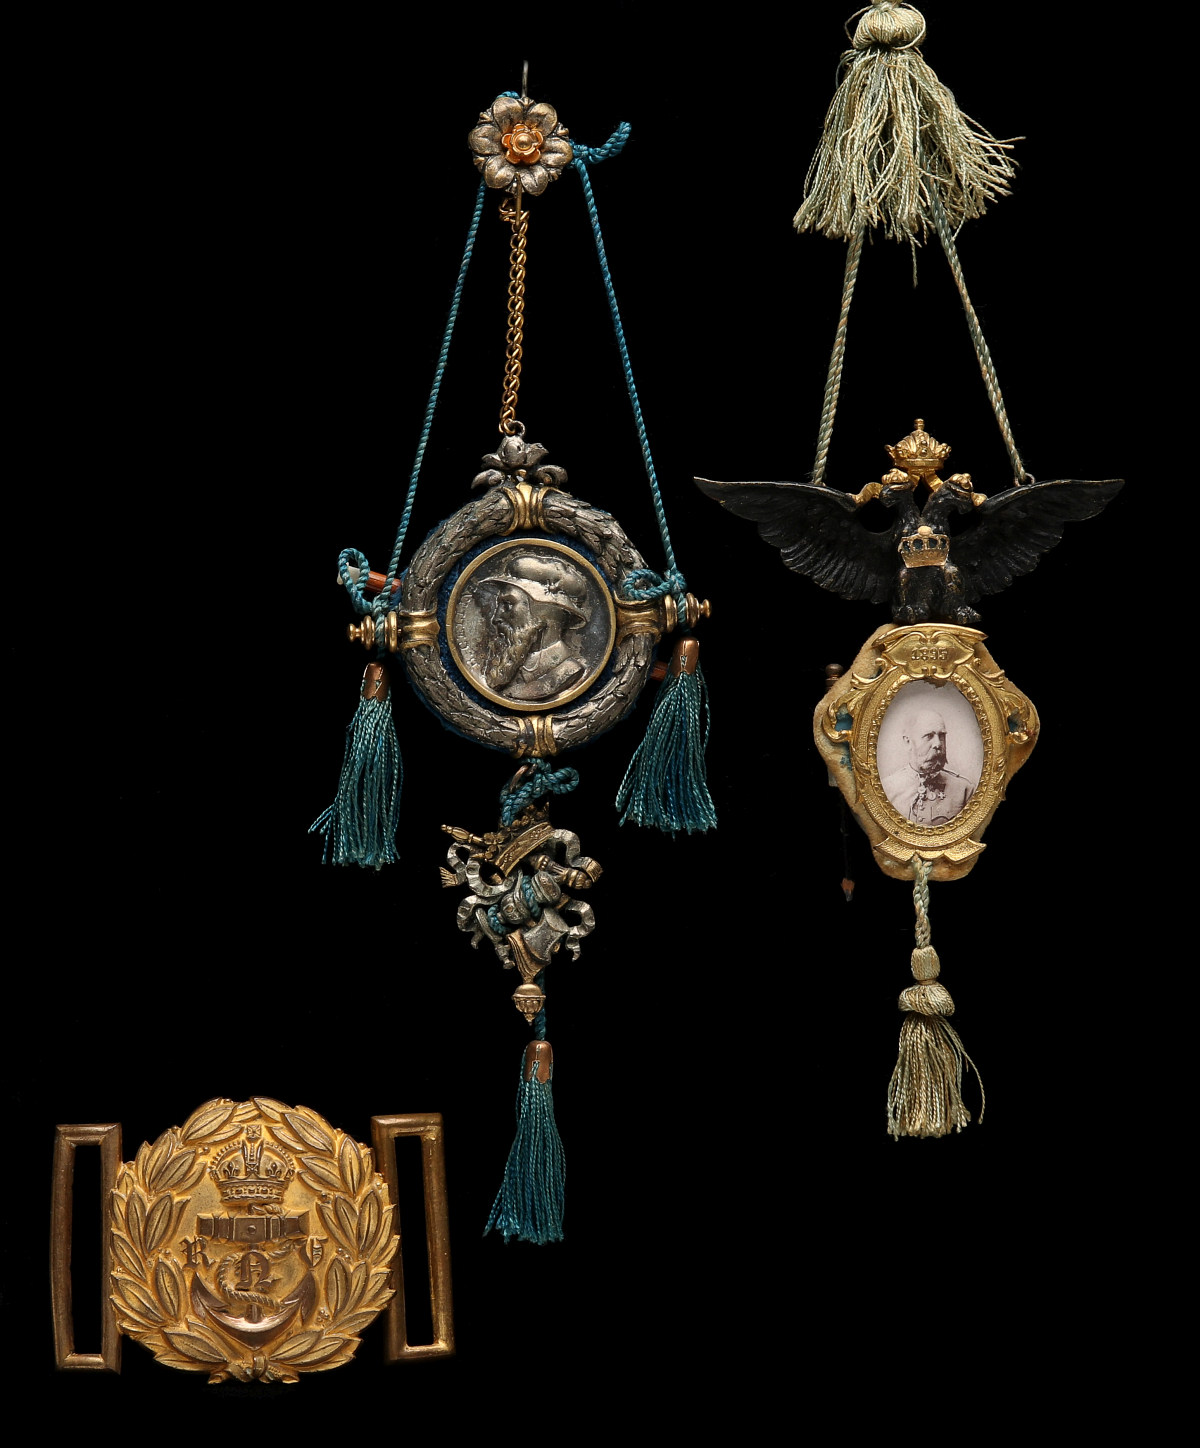 TWO ELABORATE GERMAN CHATELAINE DANCE CARDS CIRCA 1890s